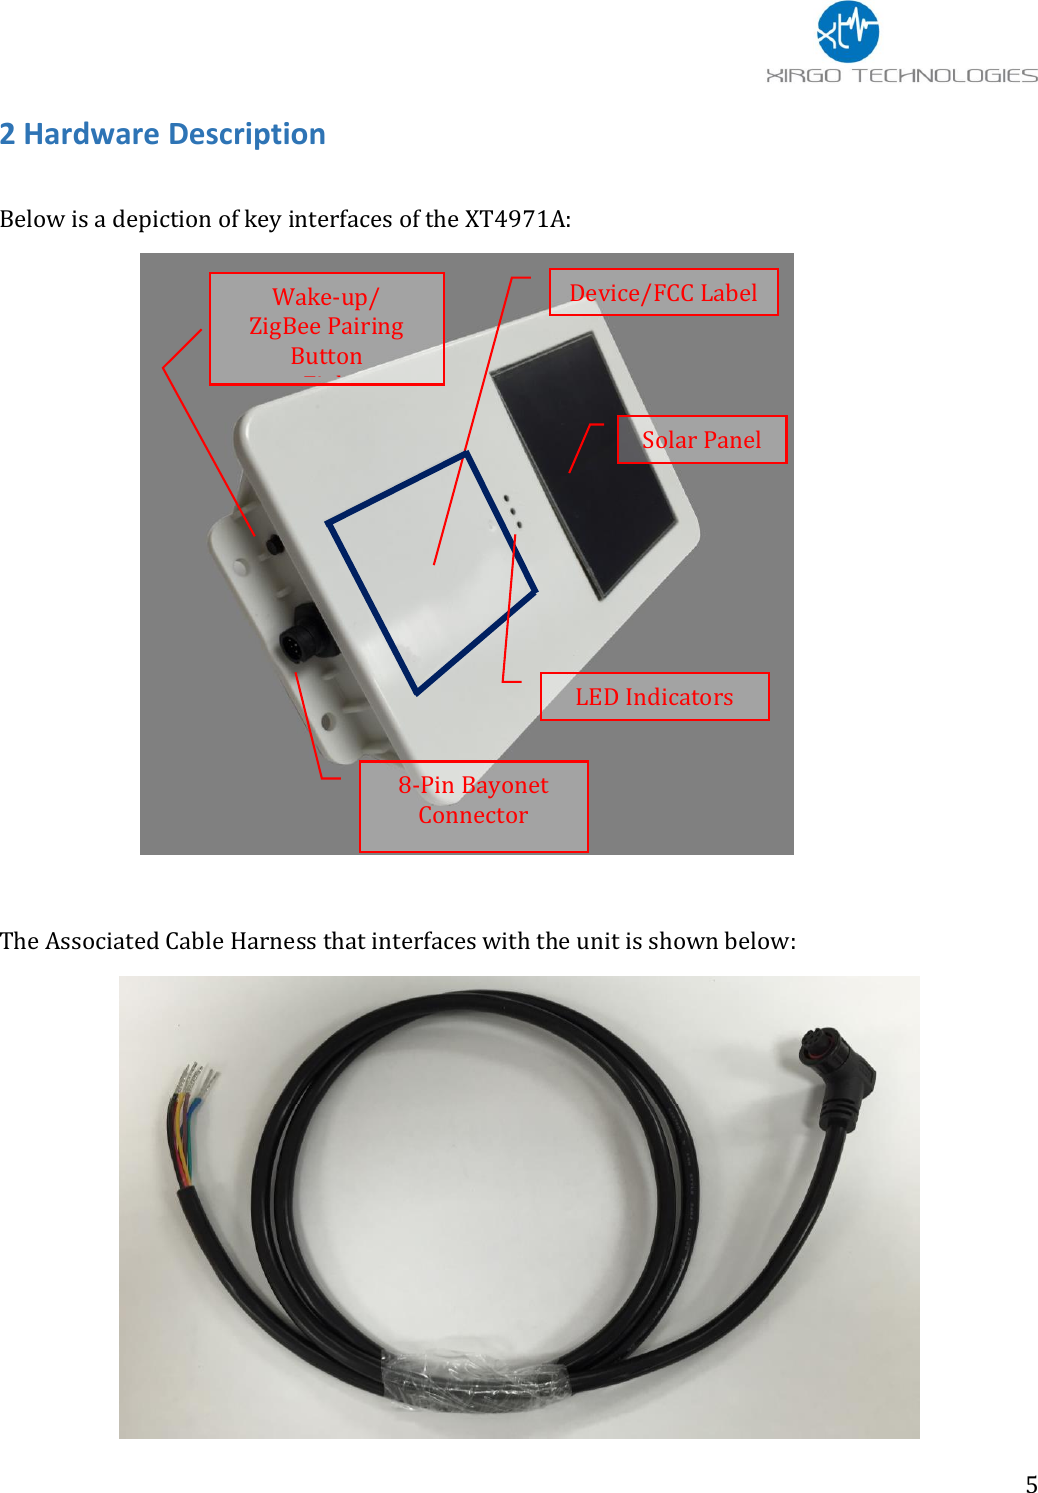                 5 2 Hardware Description    Below is a depiction of key interfaces of the XT4971A:   The Associated Cable Harness that interfaces with the unit is shown below:  Solar Panel Device/FCC Label Wake-up/ ZigBee Pairing Button Zigb 8-Pin Bayonet Connector LED Indicators 